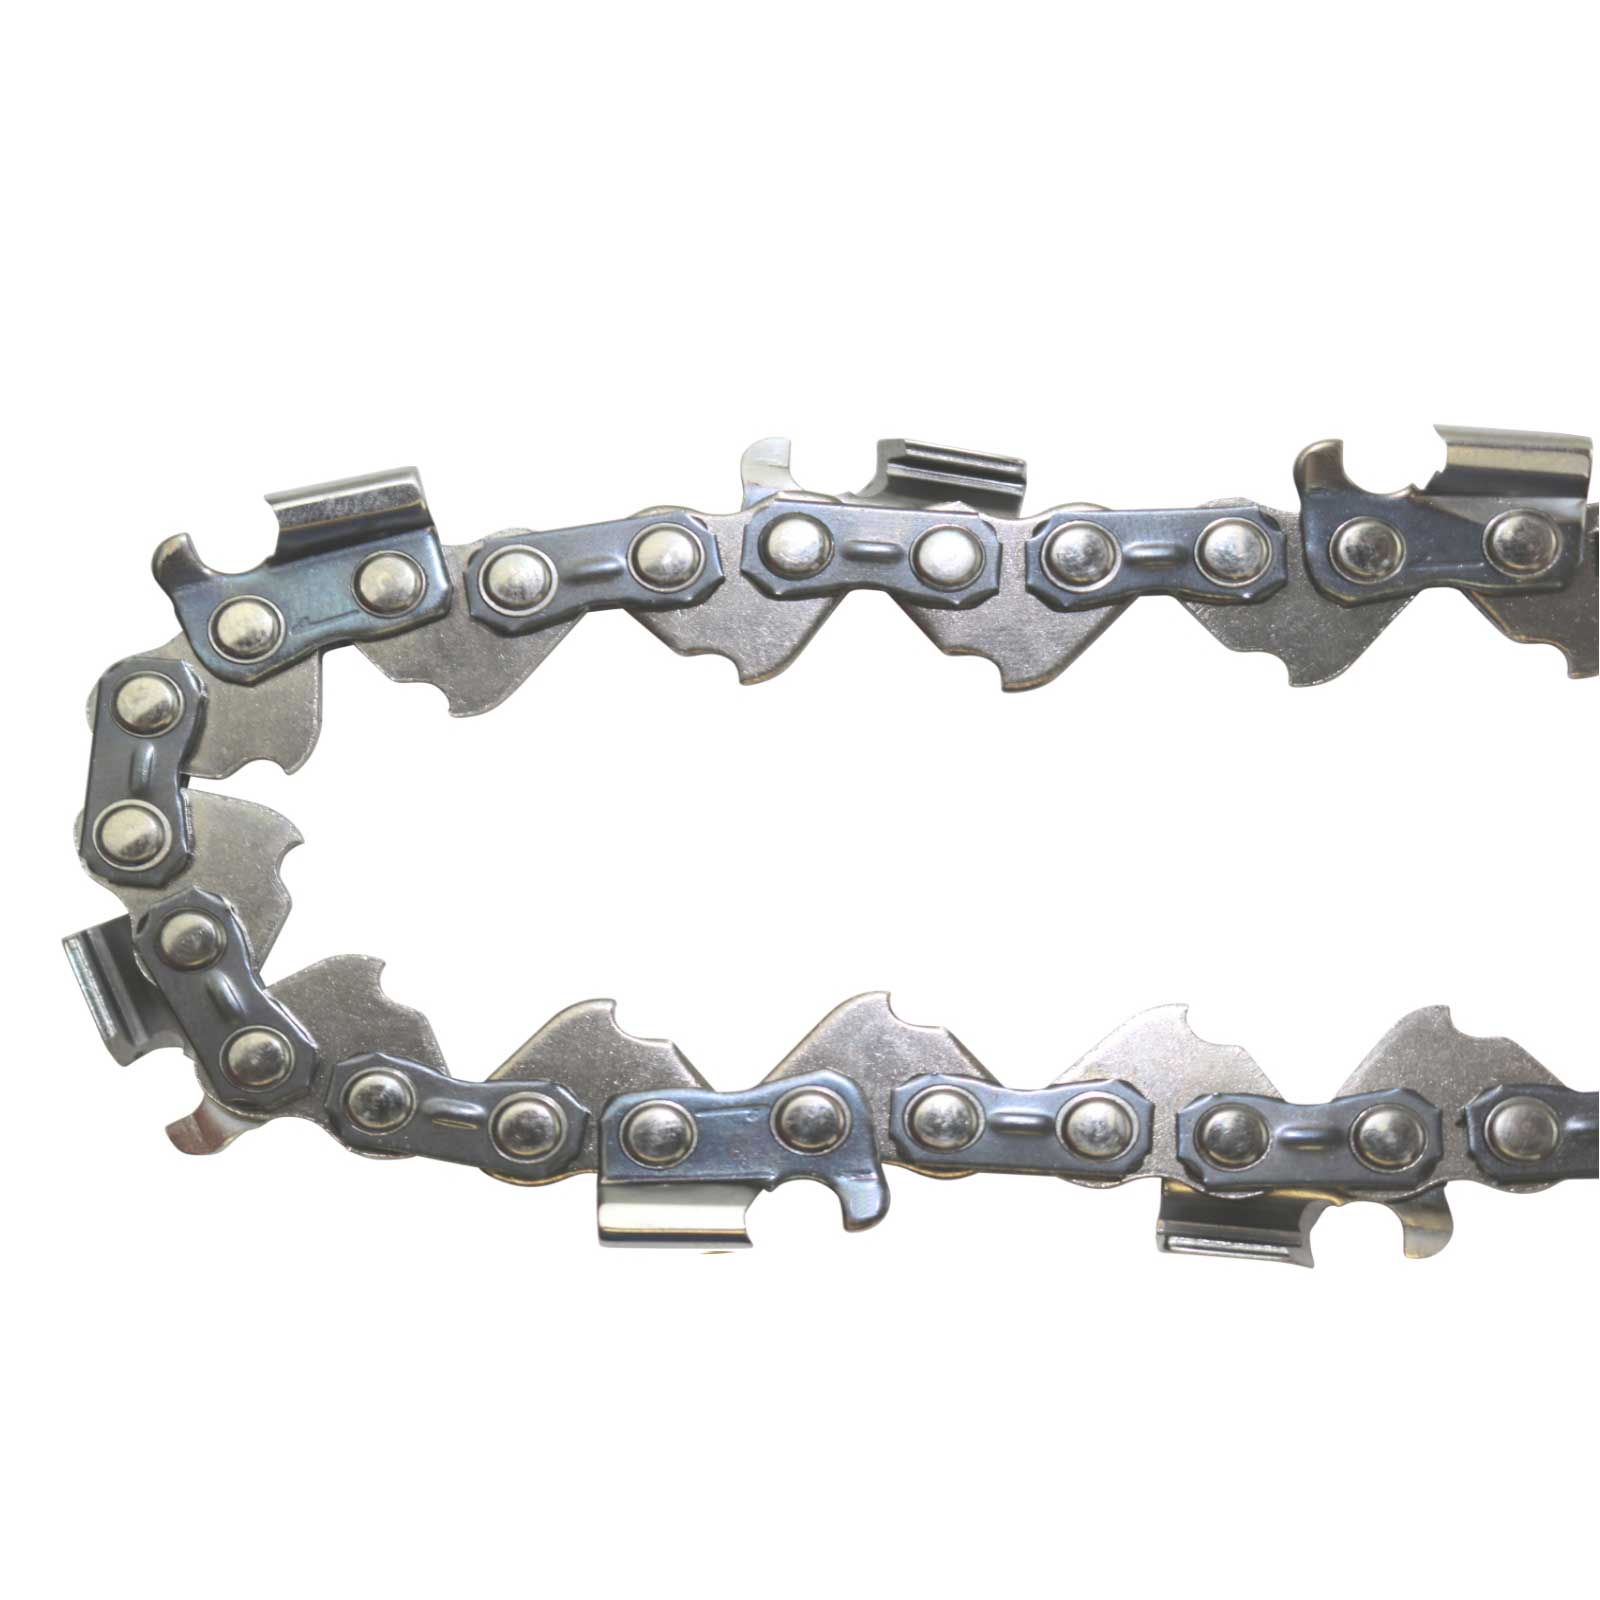 Details about   SEMI CHISEL CHAINSAW SAW CHAINS 325 050 64DL FOR FITS 15" TANAKA TCS40EA 